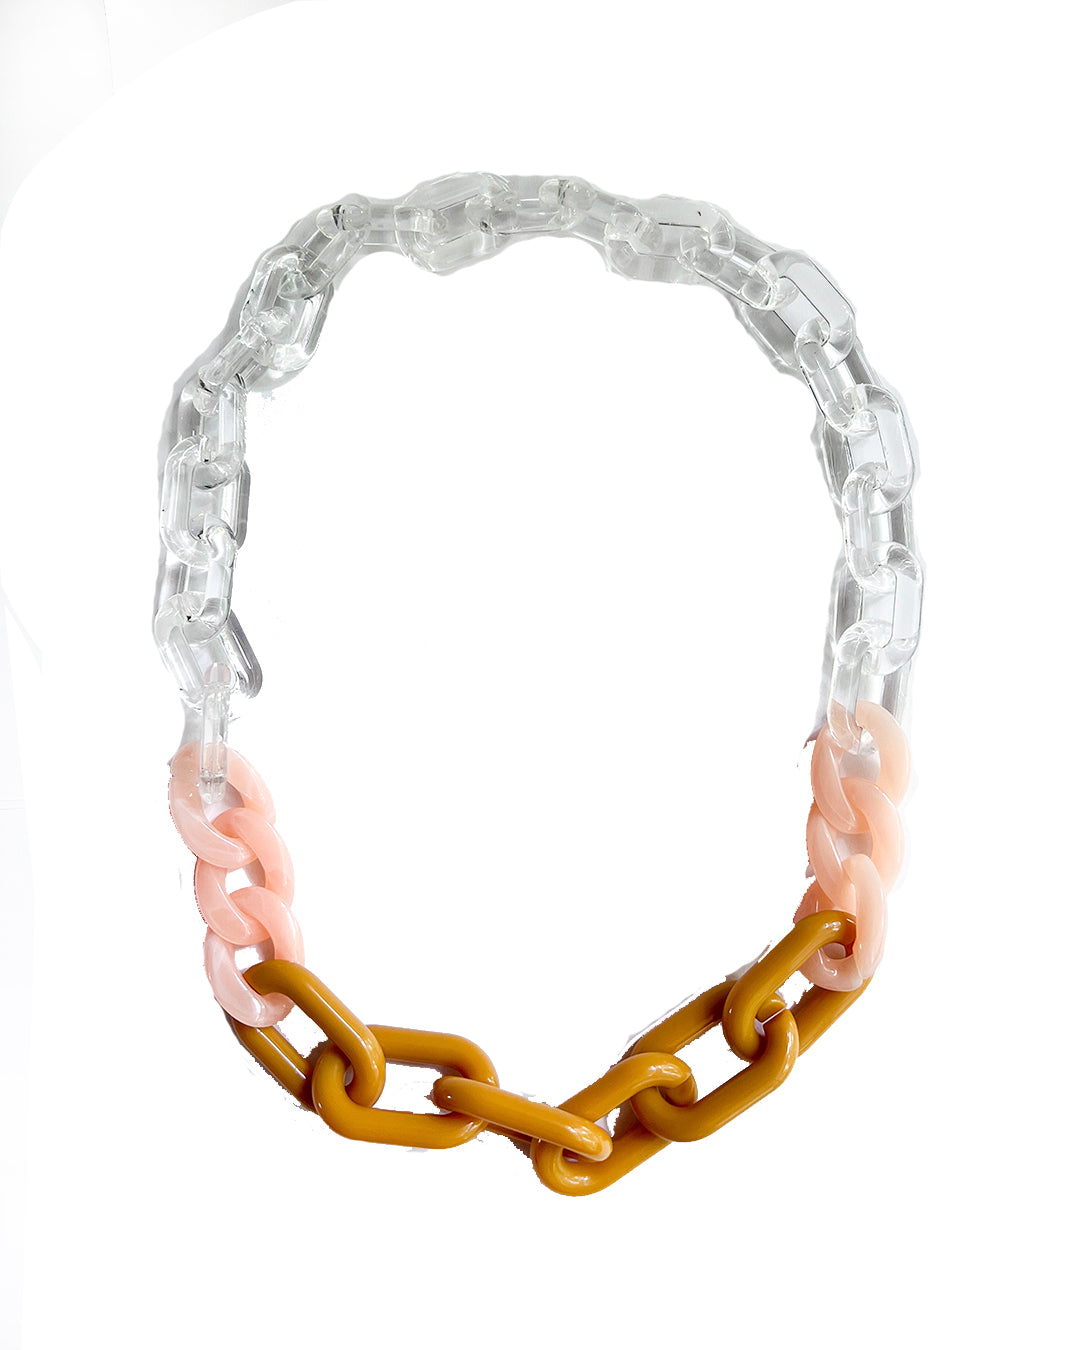 Infinite Colors Cami Necklace - Mustard Yellow Pink Clear | cukimber designs